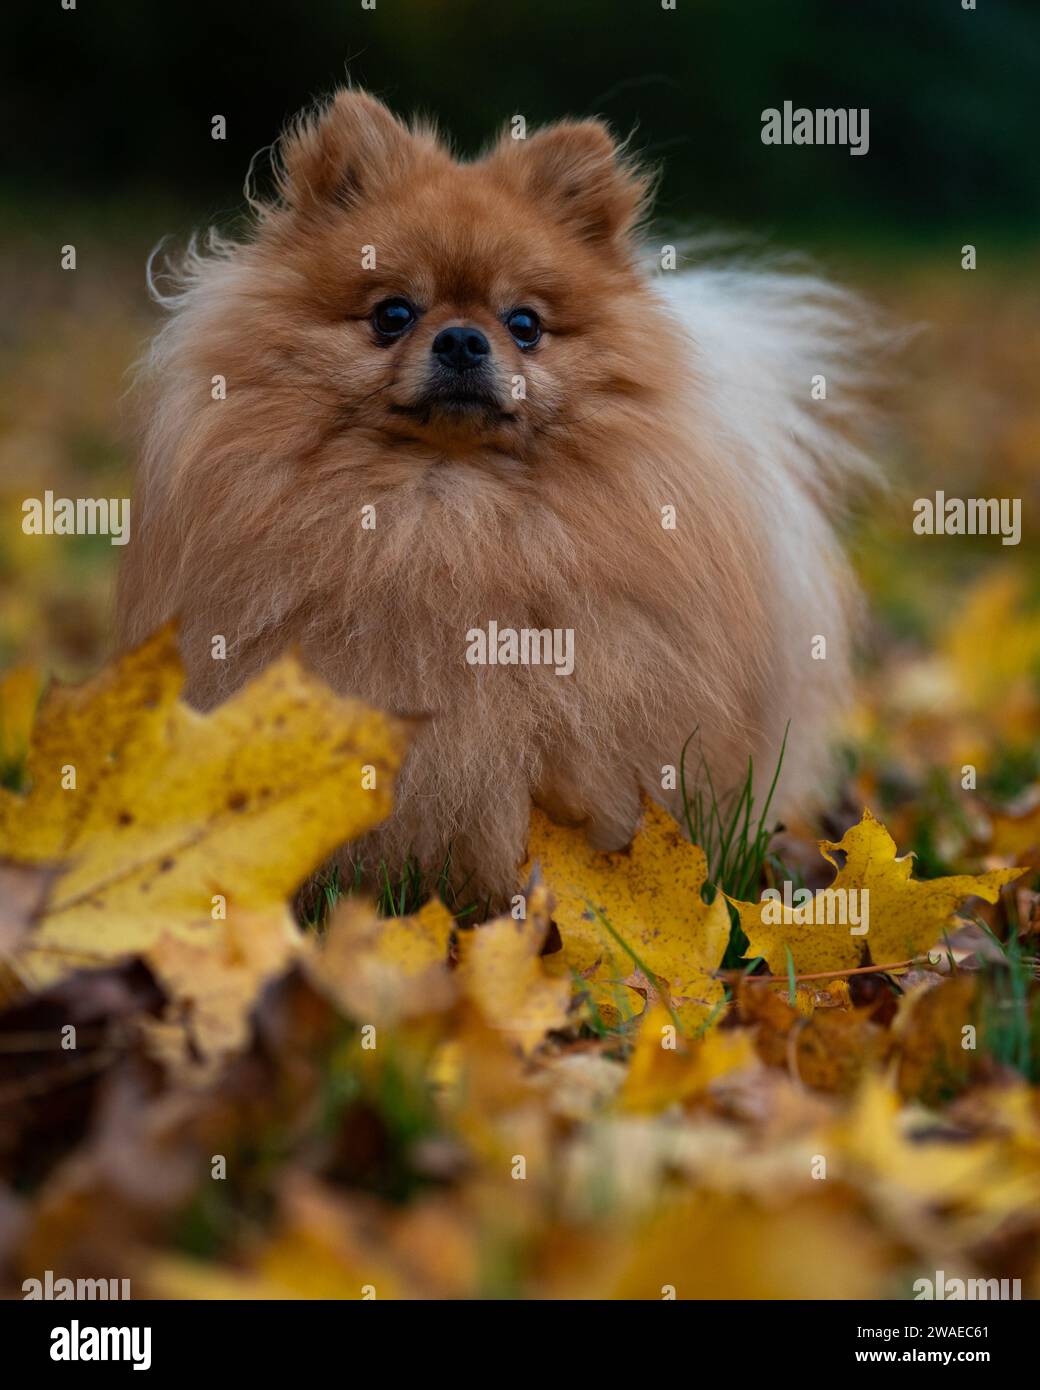 An adorable pomeranian dog with long fur sitting outdoors in a pile of autumn leaves Stock Photo